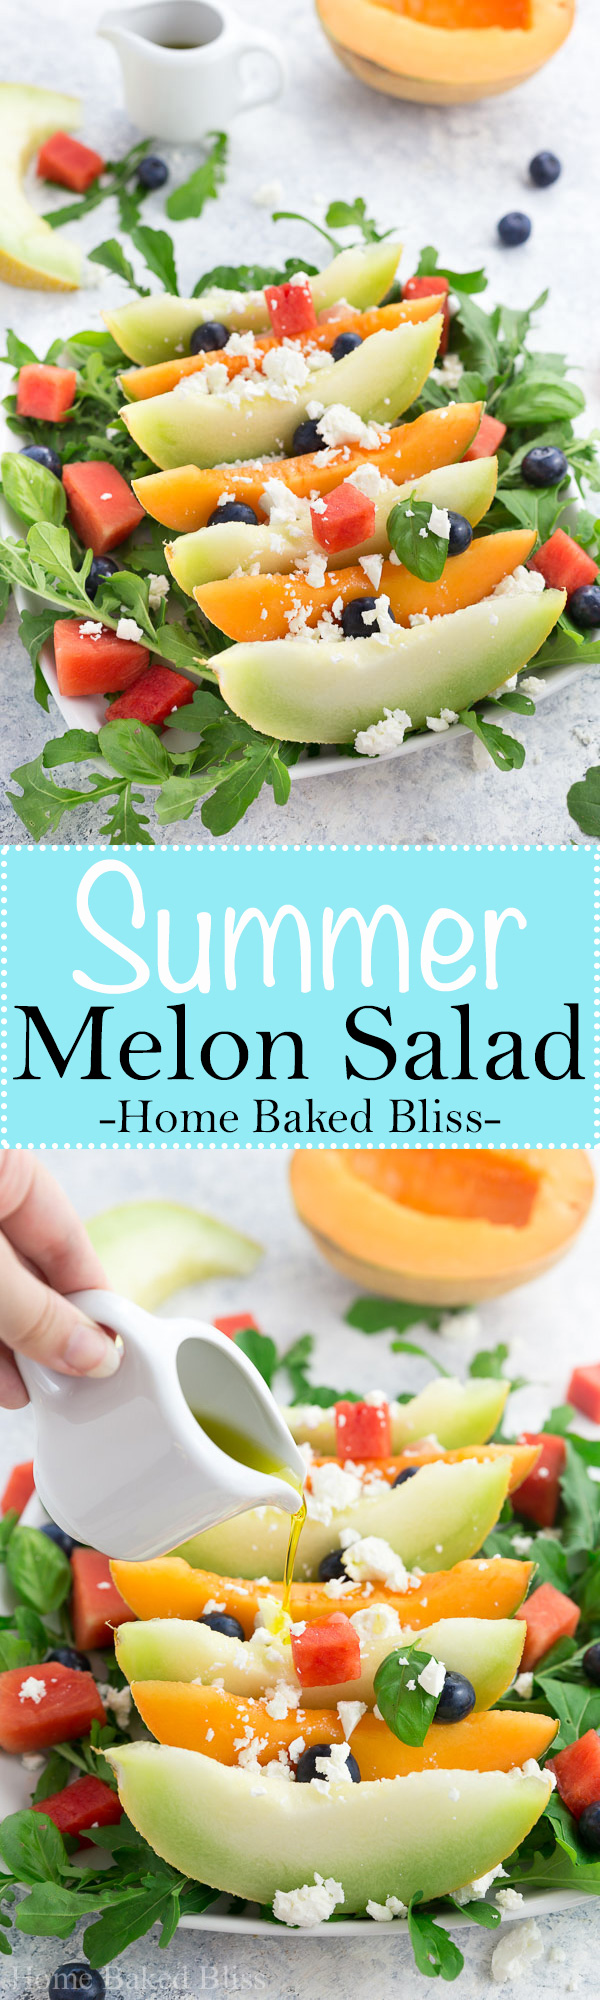 A light and refreshing summer melon salad composed of cantaloupe, honeydew and watermelon. Topped off with feta cheese and olive oil this salad makes a wonderful salty and sweet side dish for bbqs, parties and get-togethers. #summerrecipe #melonsalad #summersalad #melon | homebakedbliss.com